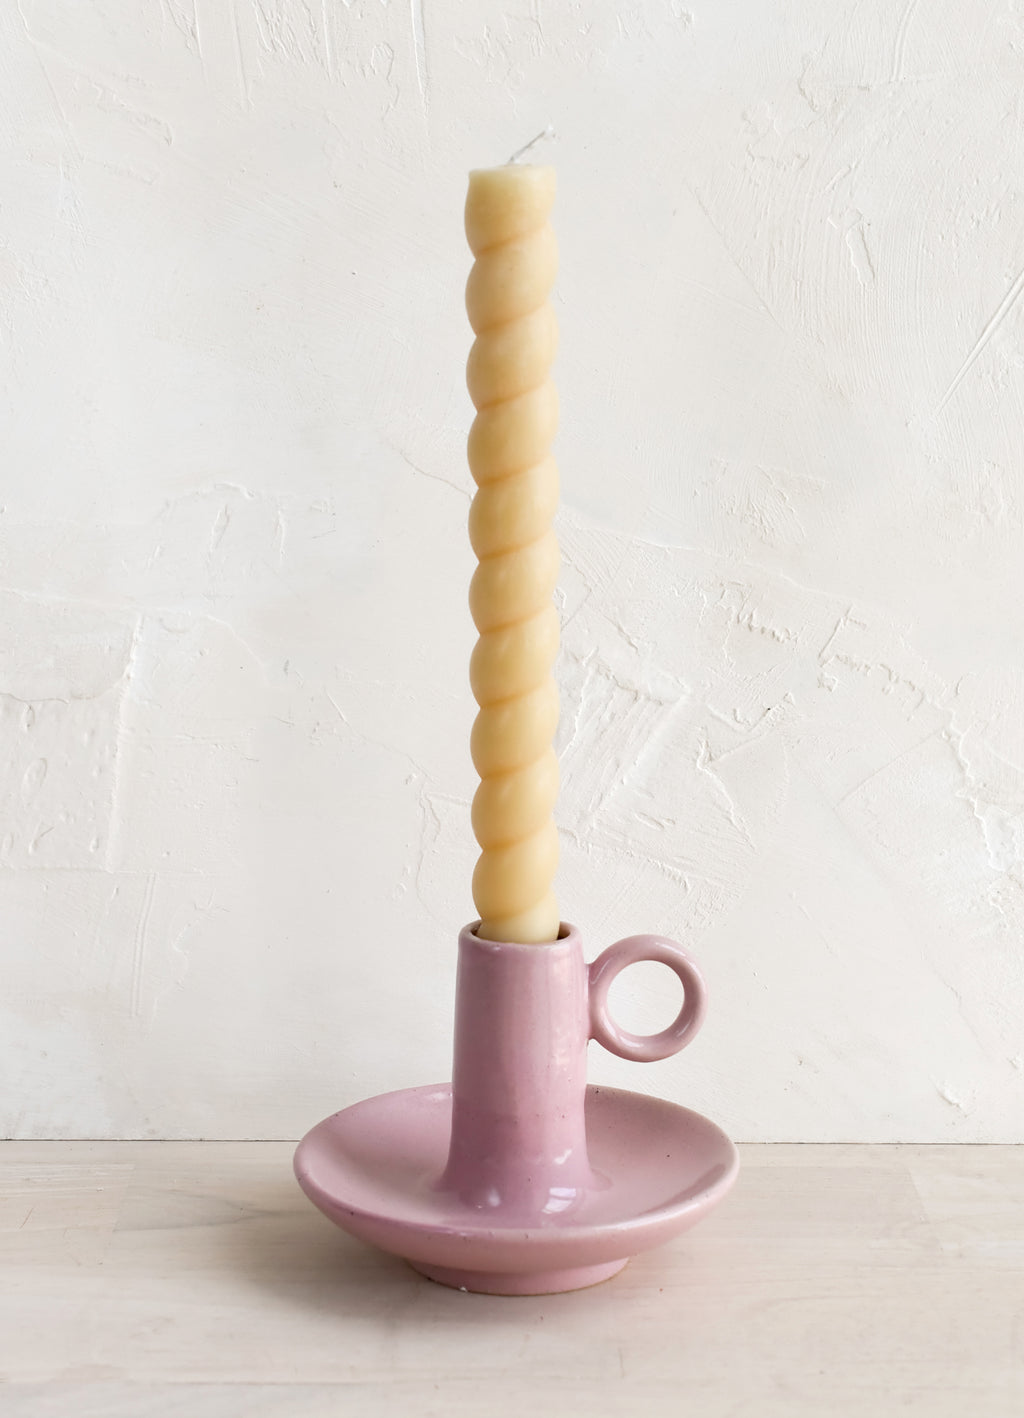 5: A pink taper holder holding a twisted taper candle.